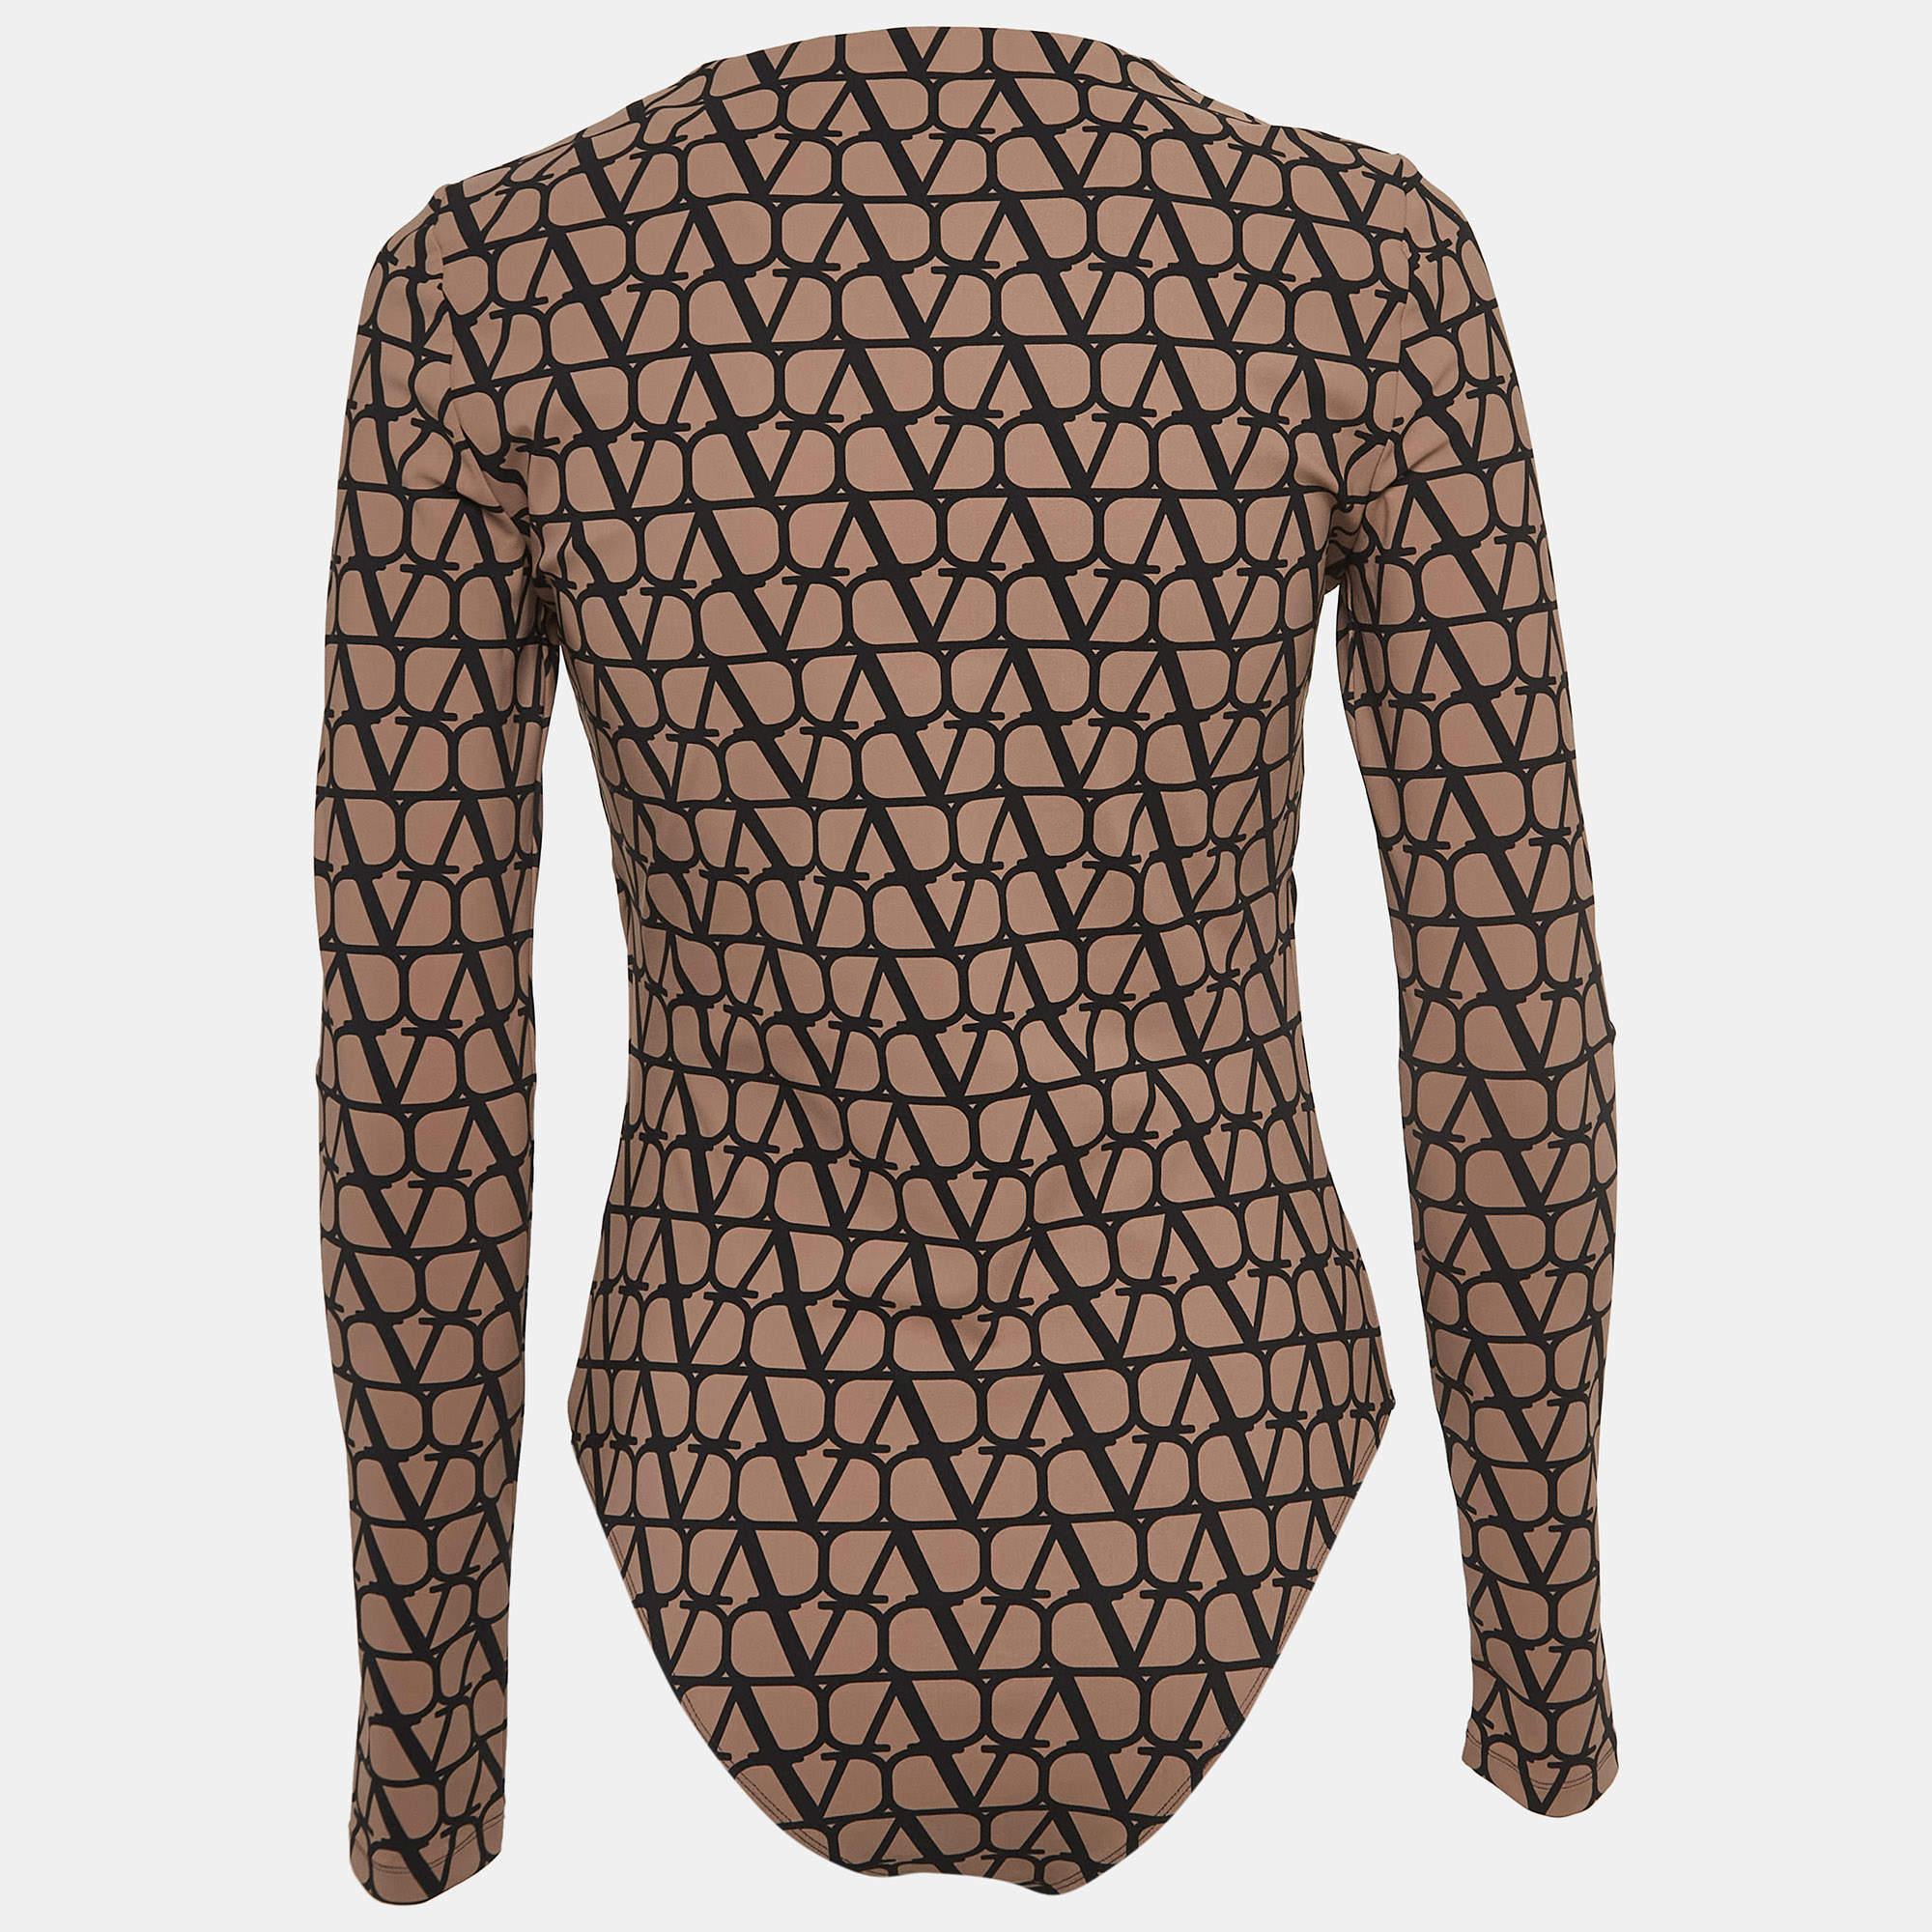 Experience effortless chic with the Valentino bodysuit. Crafted with meticulous attention to detail, this bodysuit features a timeless beige and black monogram print on soft jersey fabric. The long sleeves add versatility, making it perfect for both